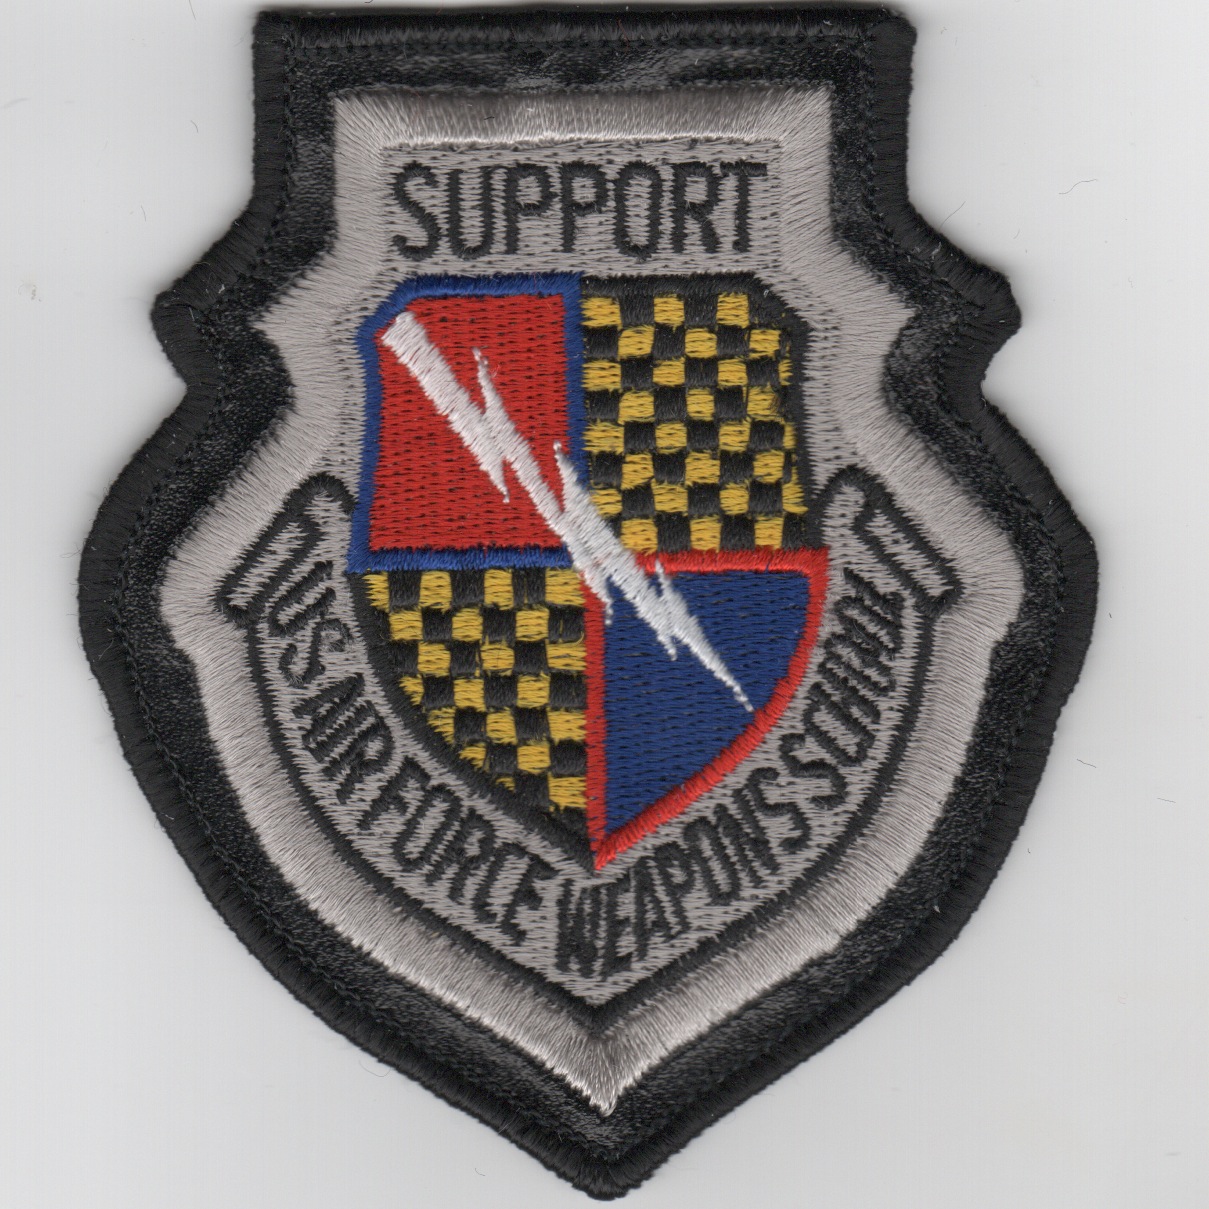 USAF WIC 'SUPPORT' Division Patch (LX)